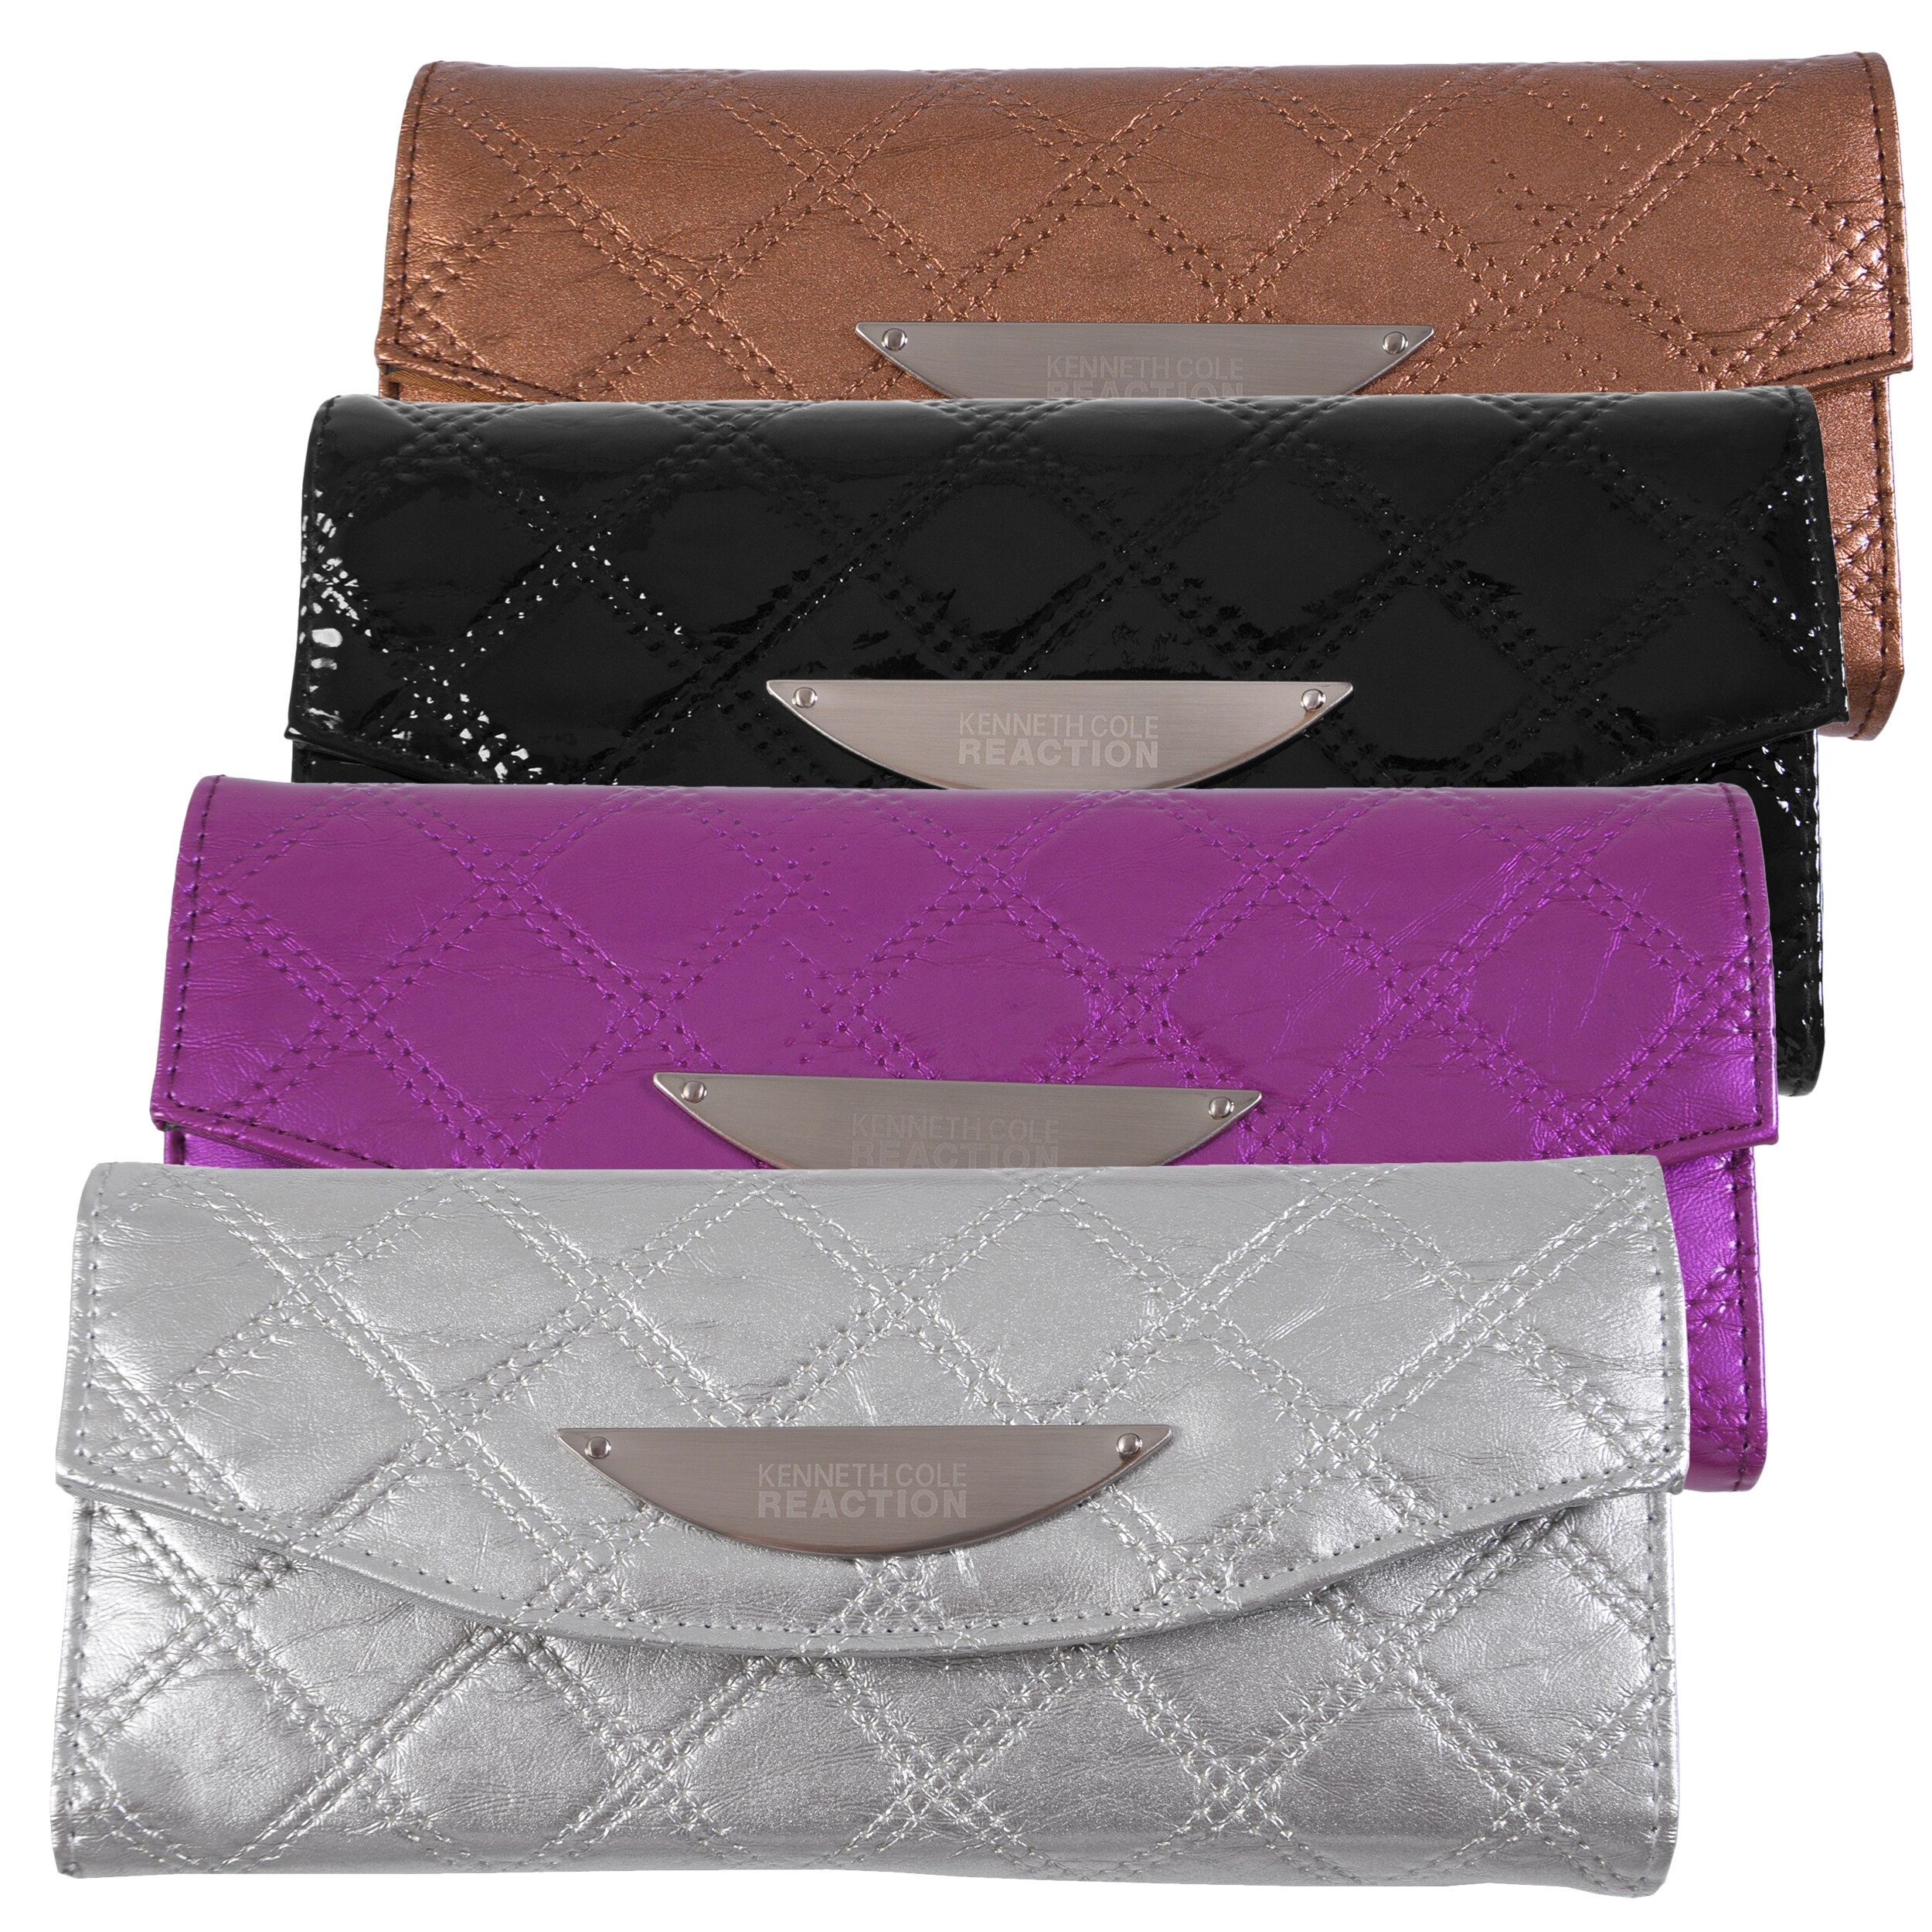 Kenneth Cole Reaction Womens Elongated Clutch